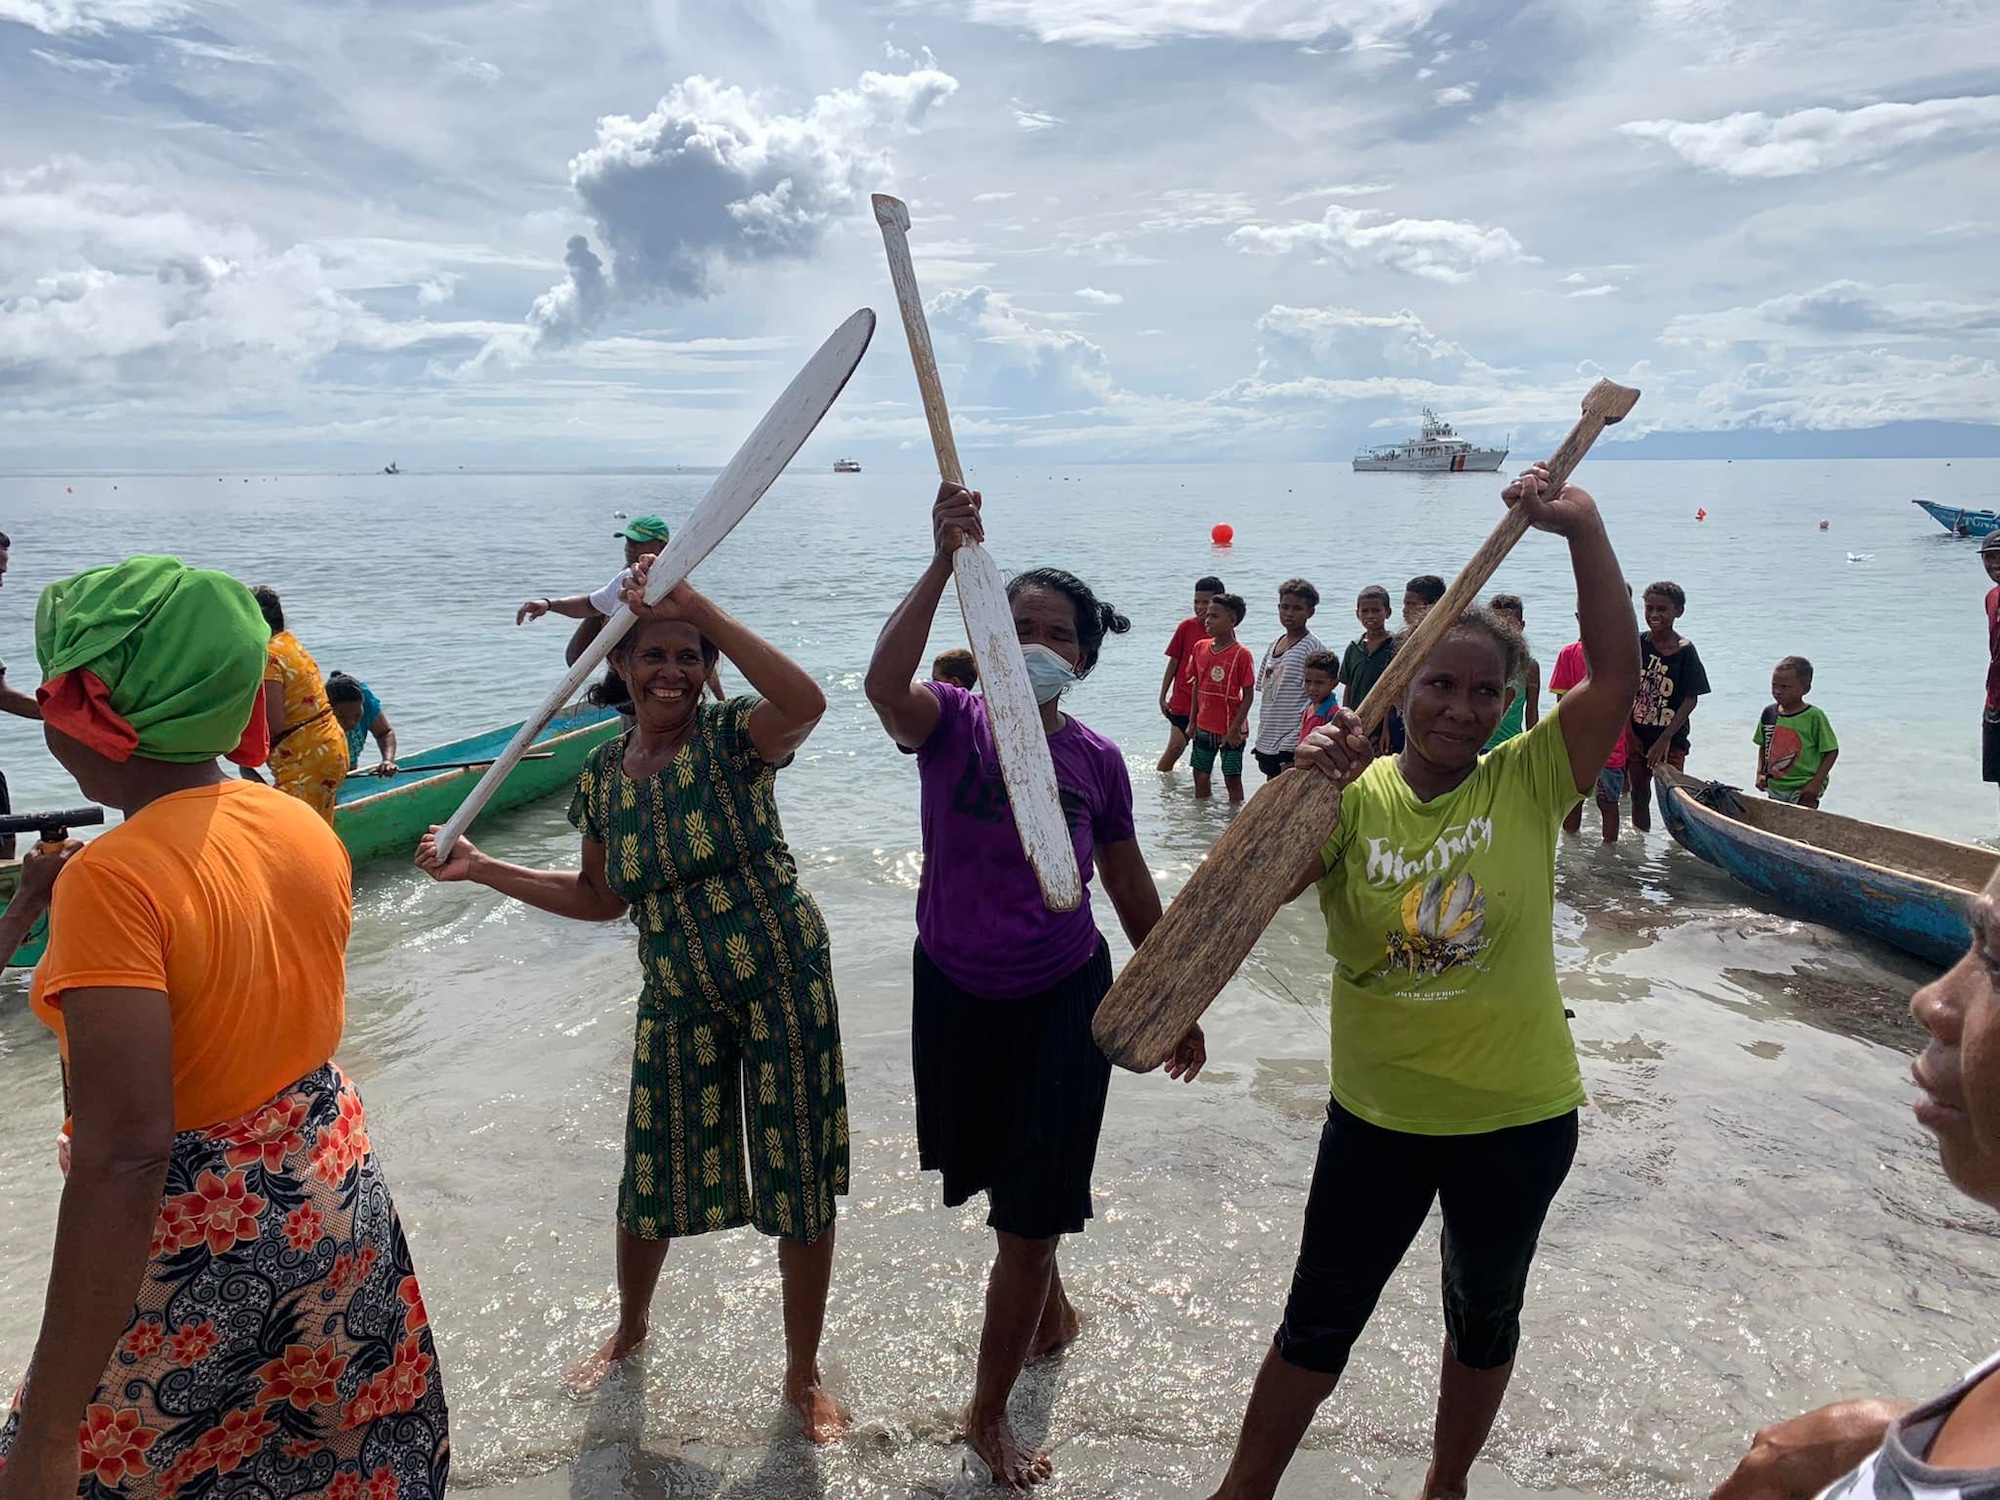 Women in Atauro celebrate their own victory in the paddling race at the First Atauro Festival